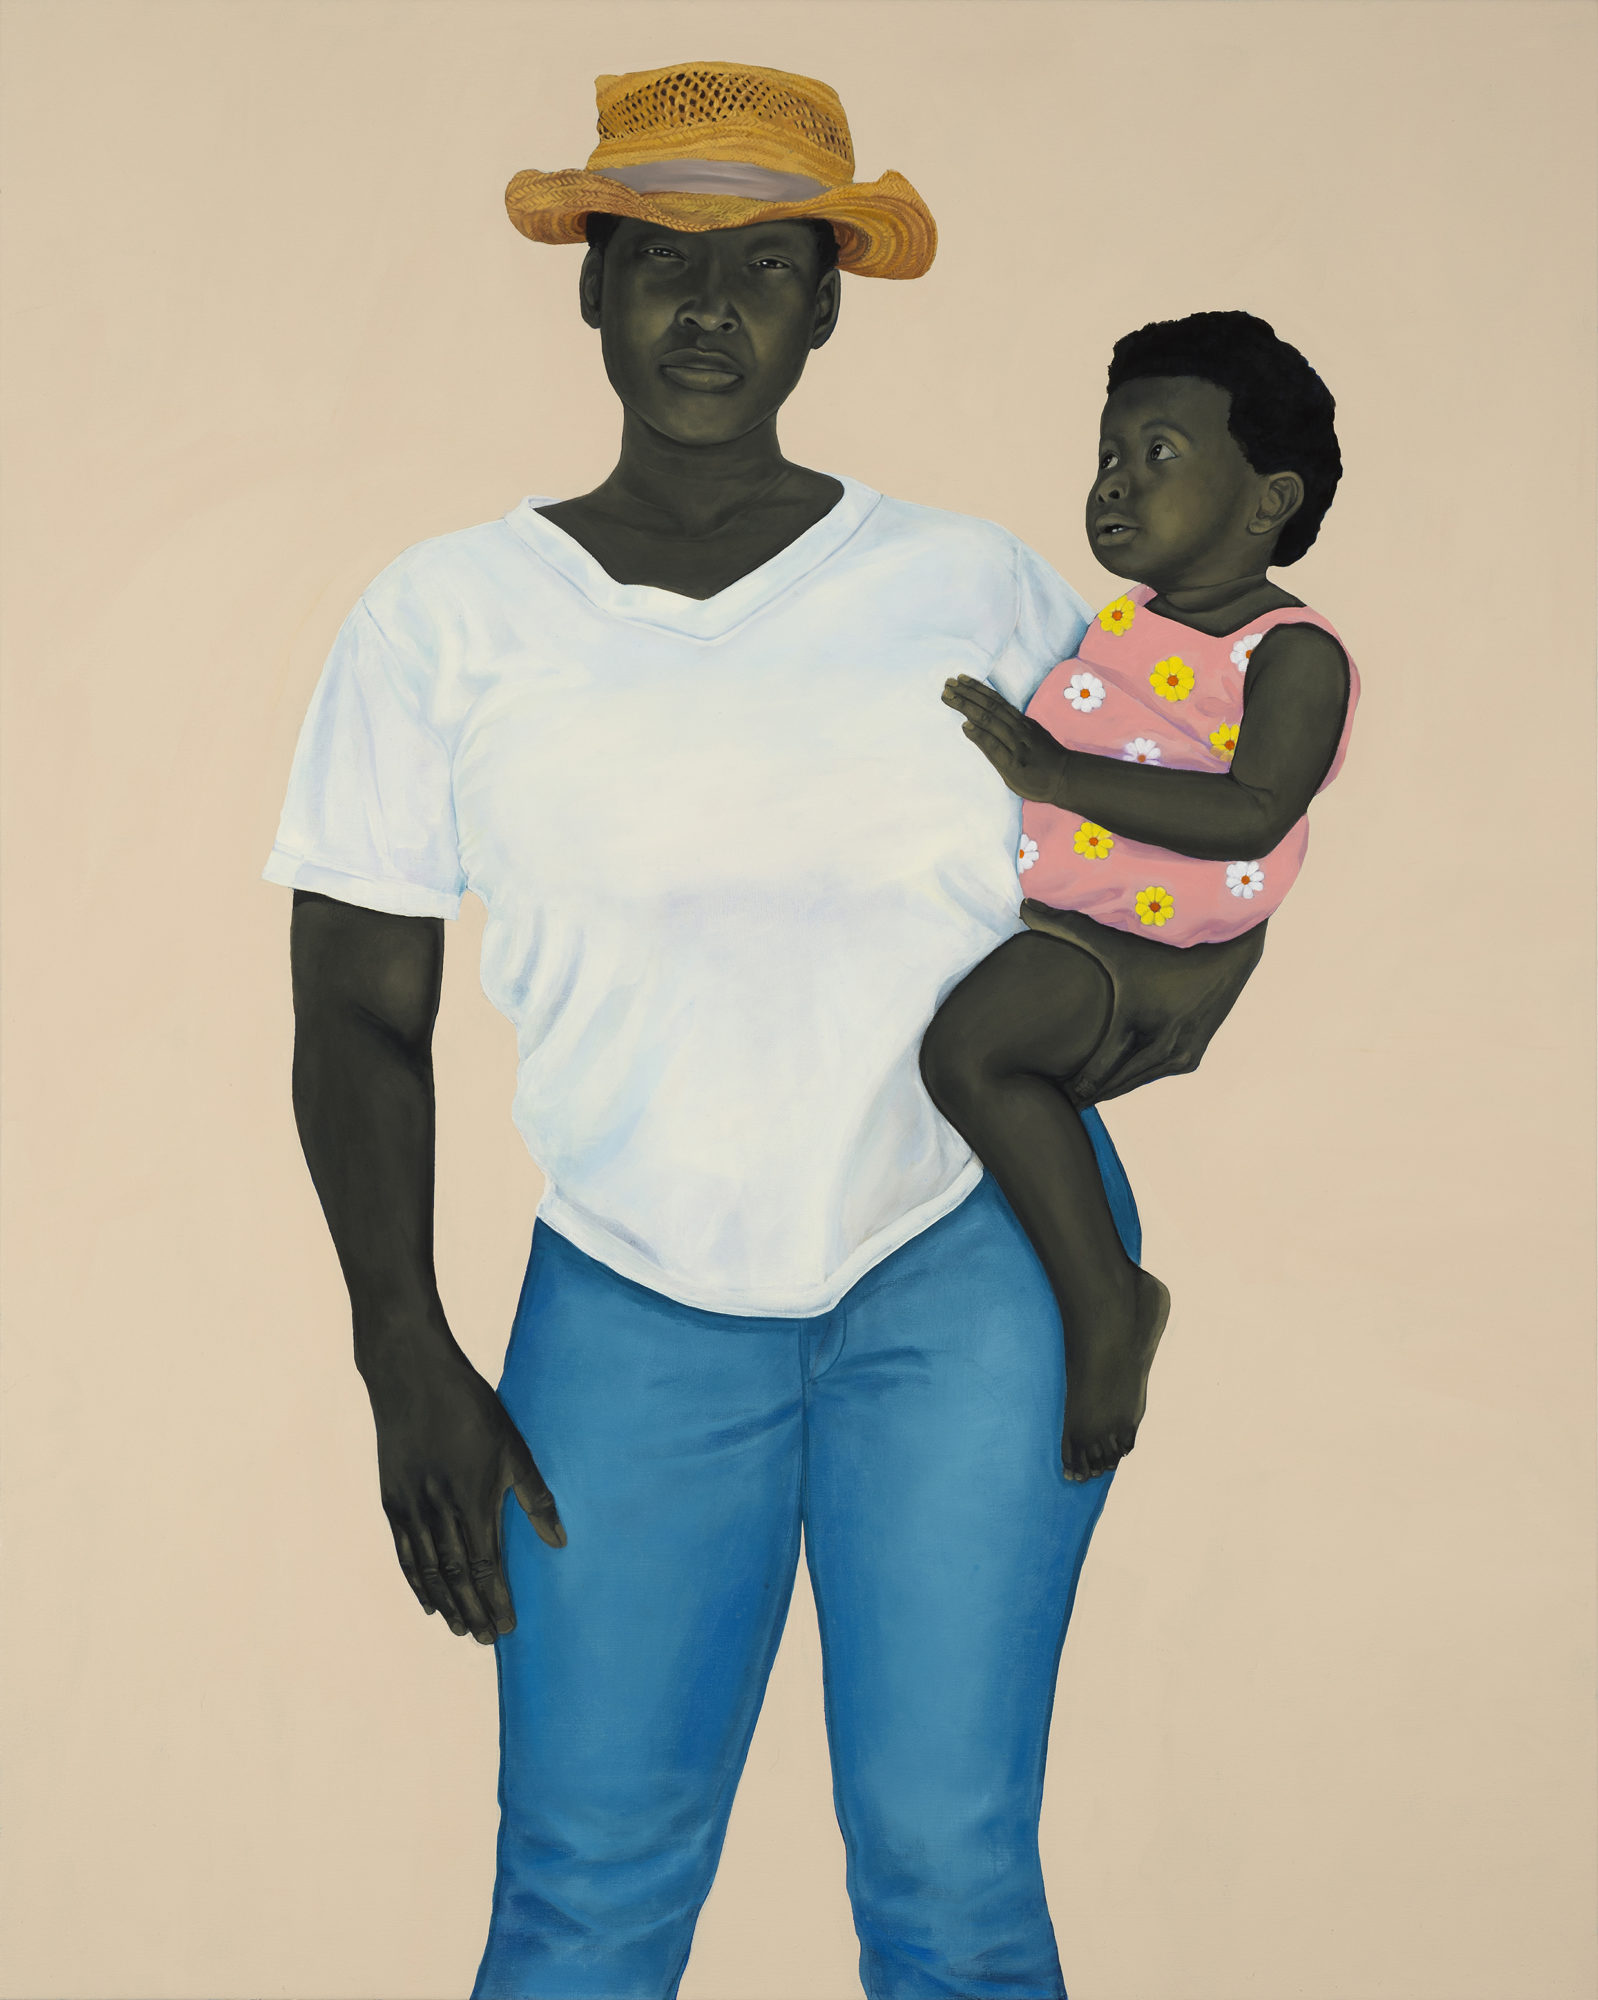 A woman in a hat holds a baby girl